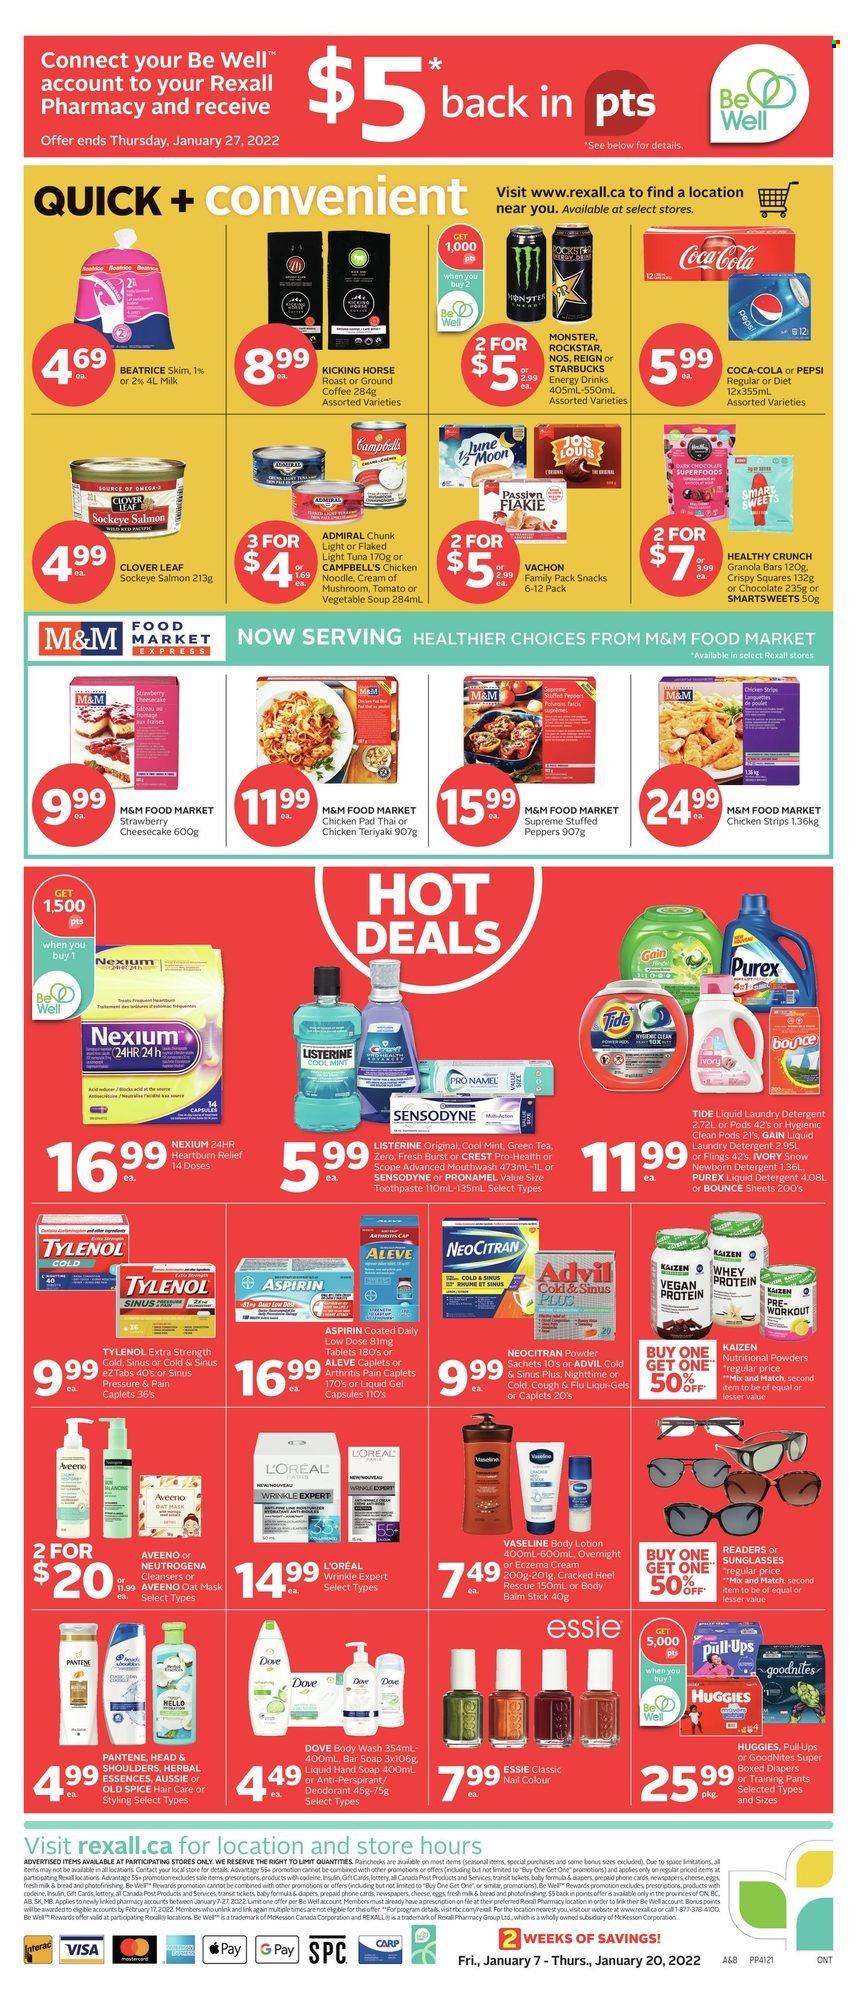 thumbnail - Rexall Flyer - January 07, 2022 - January 20, 2022 - Sales products - chocolate, snack, oats, salmon, tuna, soup, mushrooms, light tuna, peppers, granola bar, noodles, spice, Campbell's, Coca-Cola, Pepsi, energy drink, Monster, Clover, Rockstar, green tea, tea, coffee, ground coffee, Starbucks, pants, nappies, baby pants, Aveeno, Tide, liquid detergent, laundry detergent, Bounce, Purex, body wash, hand soap, Vaseline, soap bar, soap, toothpaste, mouthwash, Crest, L’Oréal, Aussie, Herbal Essences, Hask, body lotion, anti-perspirant, Aleve, Tylenol, Nexium, Advil Rapid, Low Dose, aspirin, detergent, Dove, Listerine, Neutrogena, Head & Shoulders, Huggies, Pantene, Old Spice, Sensodyne, M&M's, deodorant. Page 8.